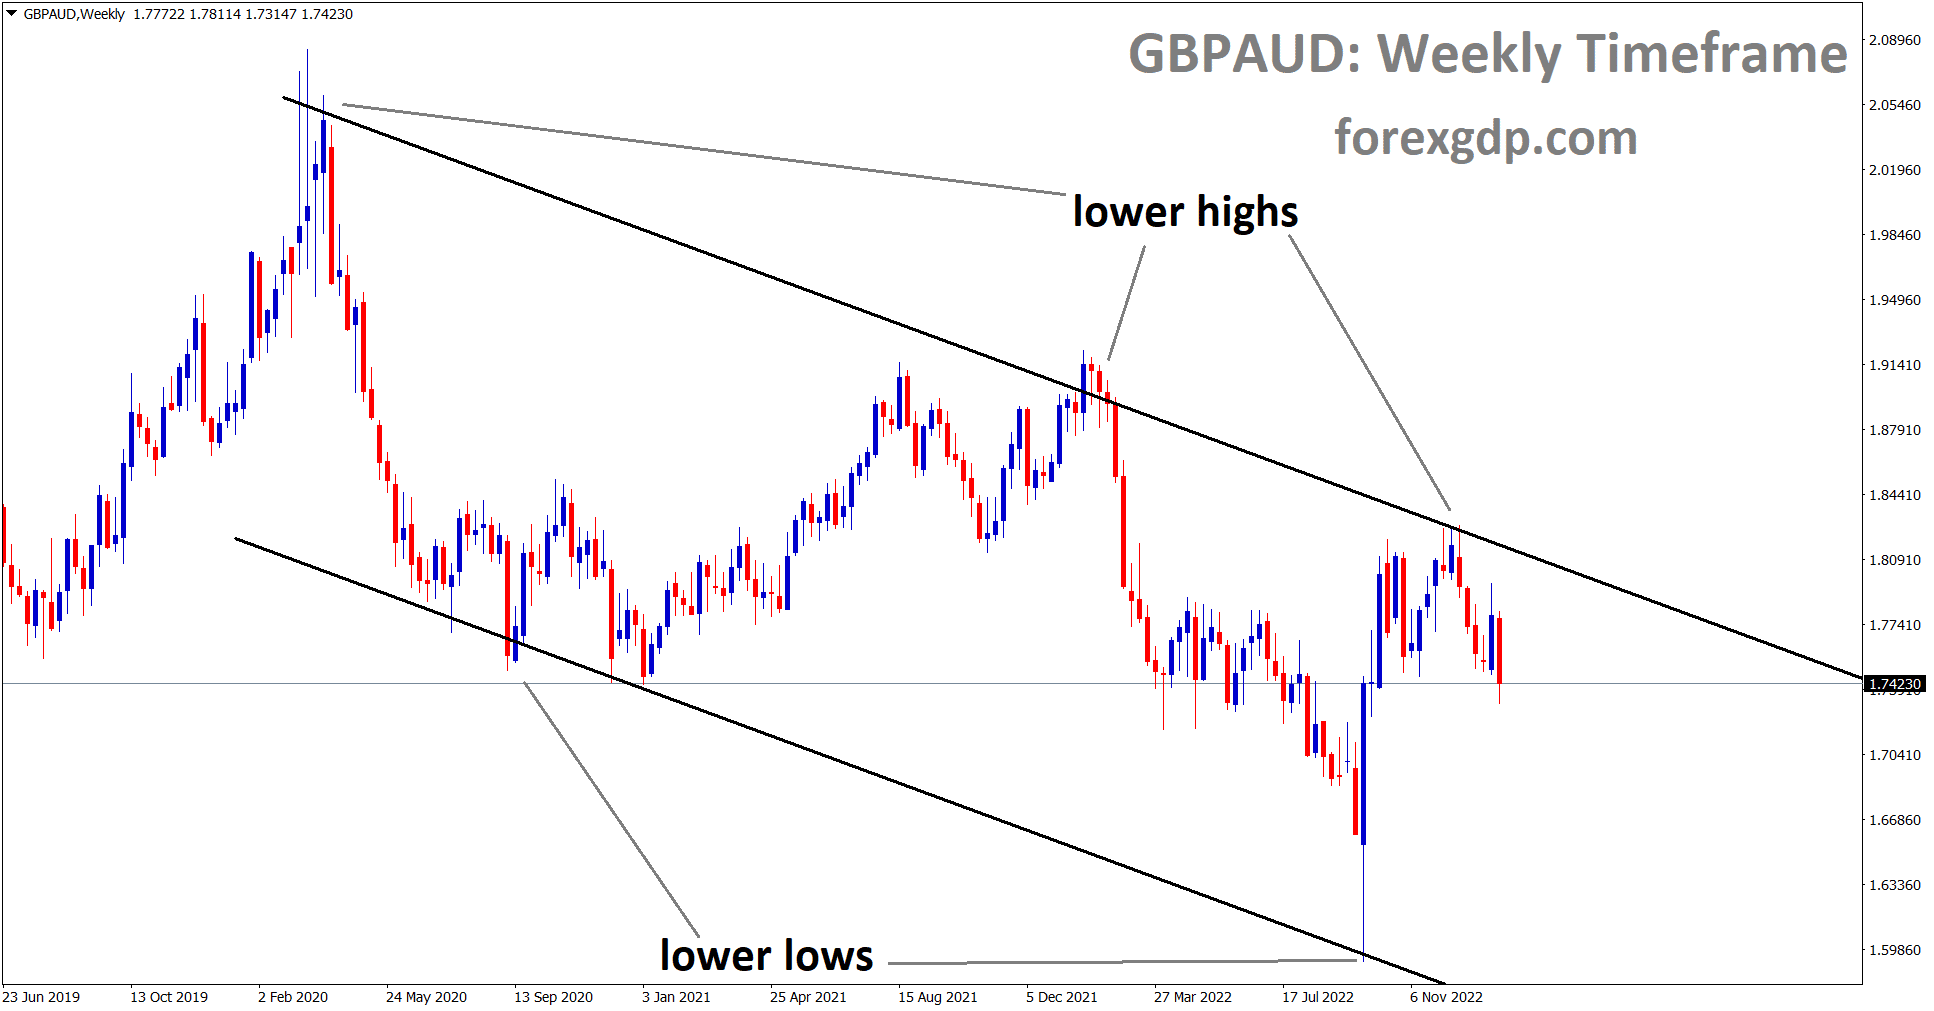 GBPAUD is moving in a Descending channel and the market has fallen from the lower high area of the channel.